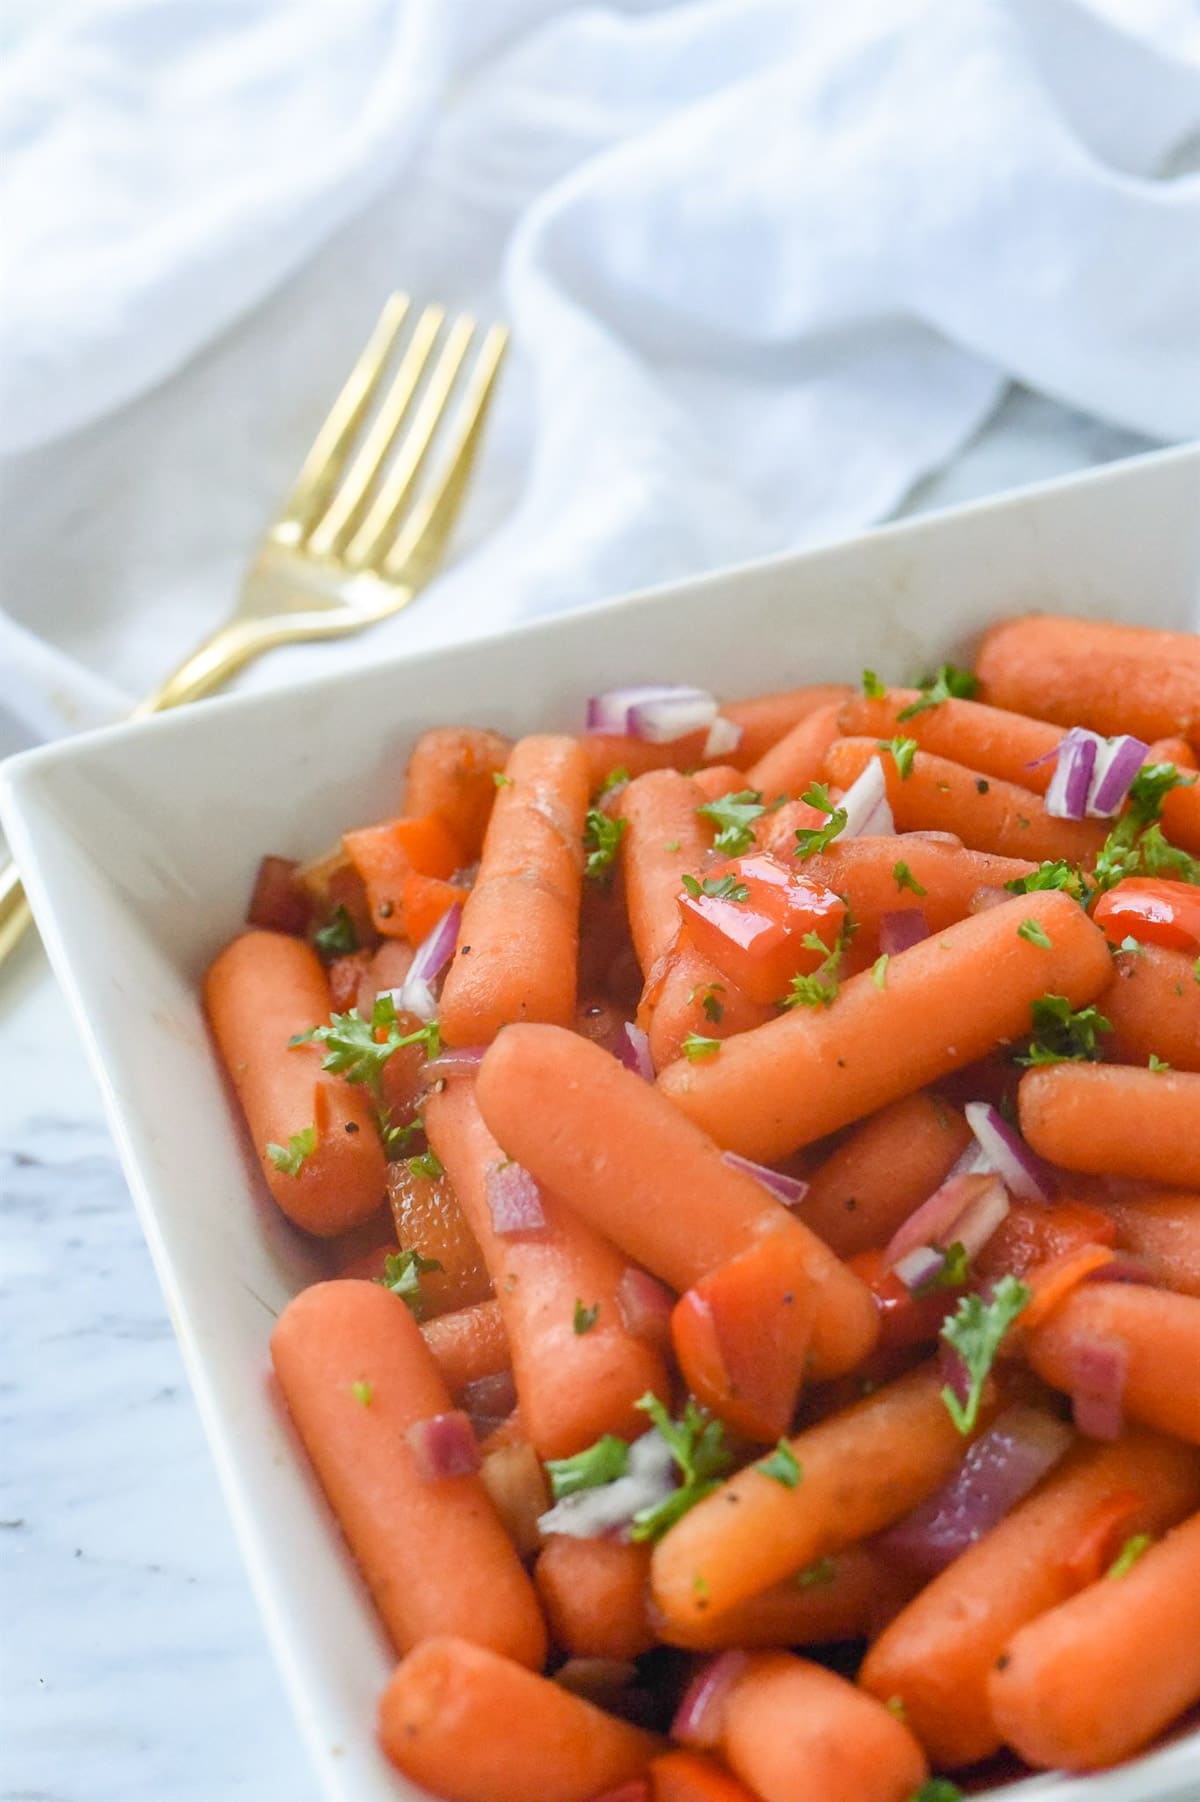 bowl of carrots and a fork